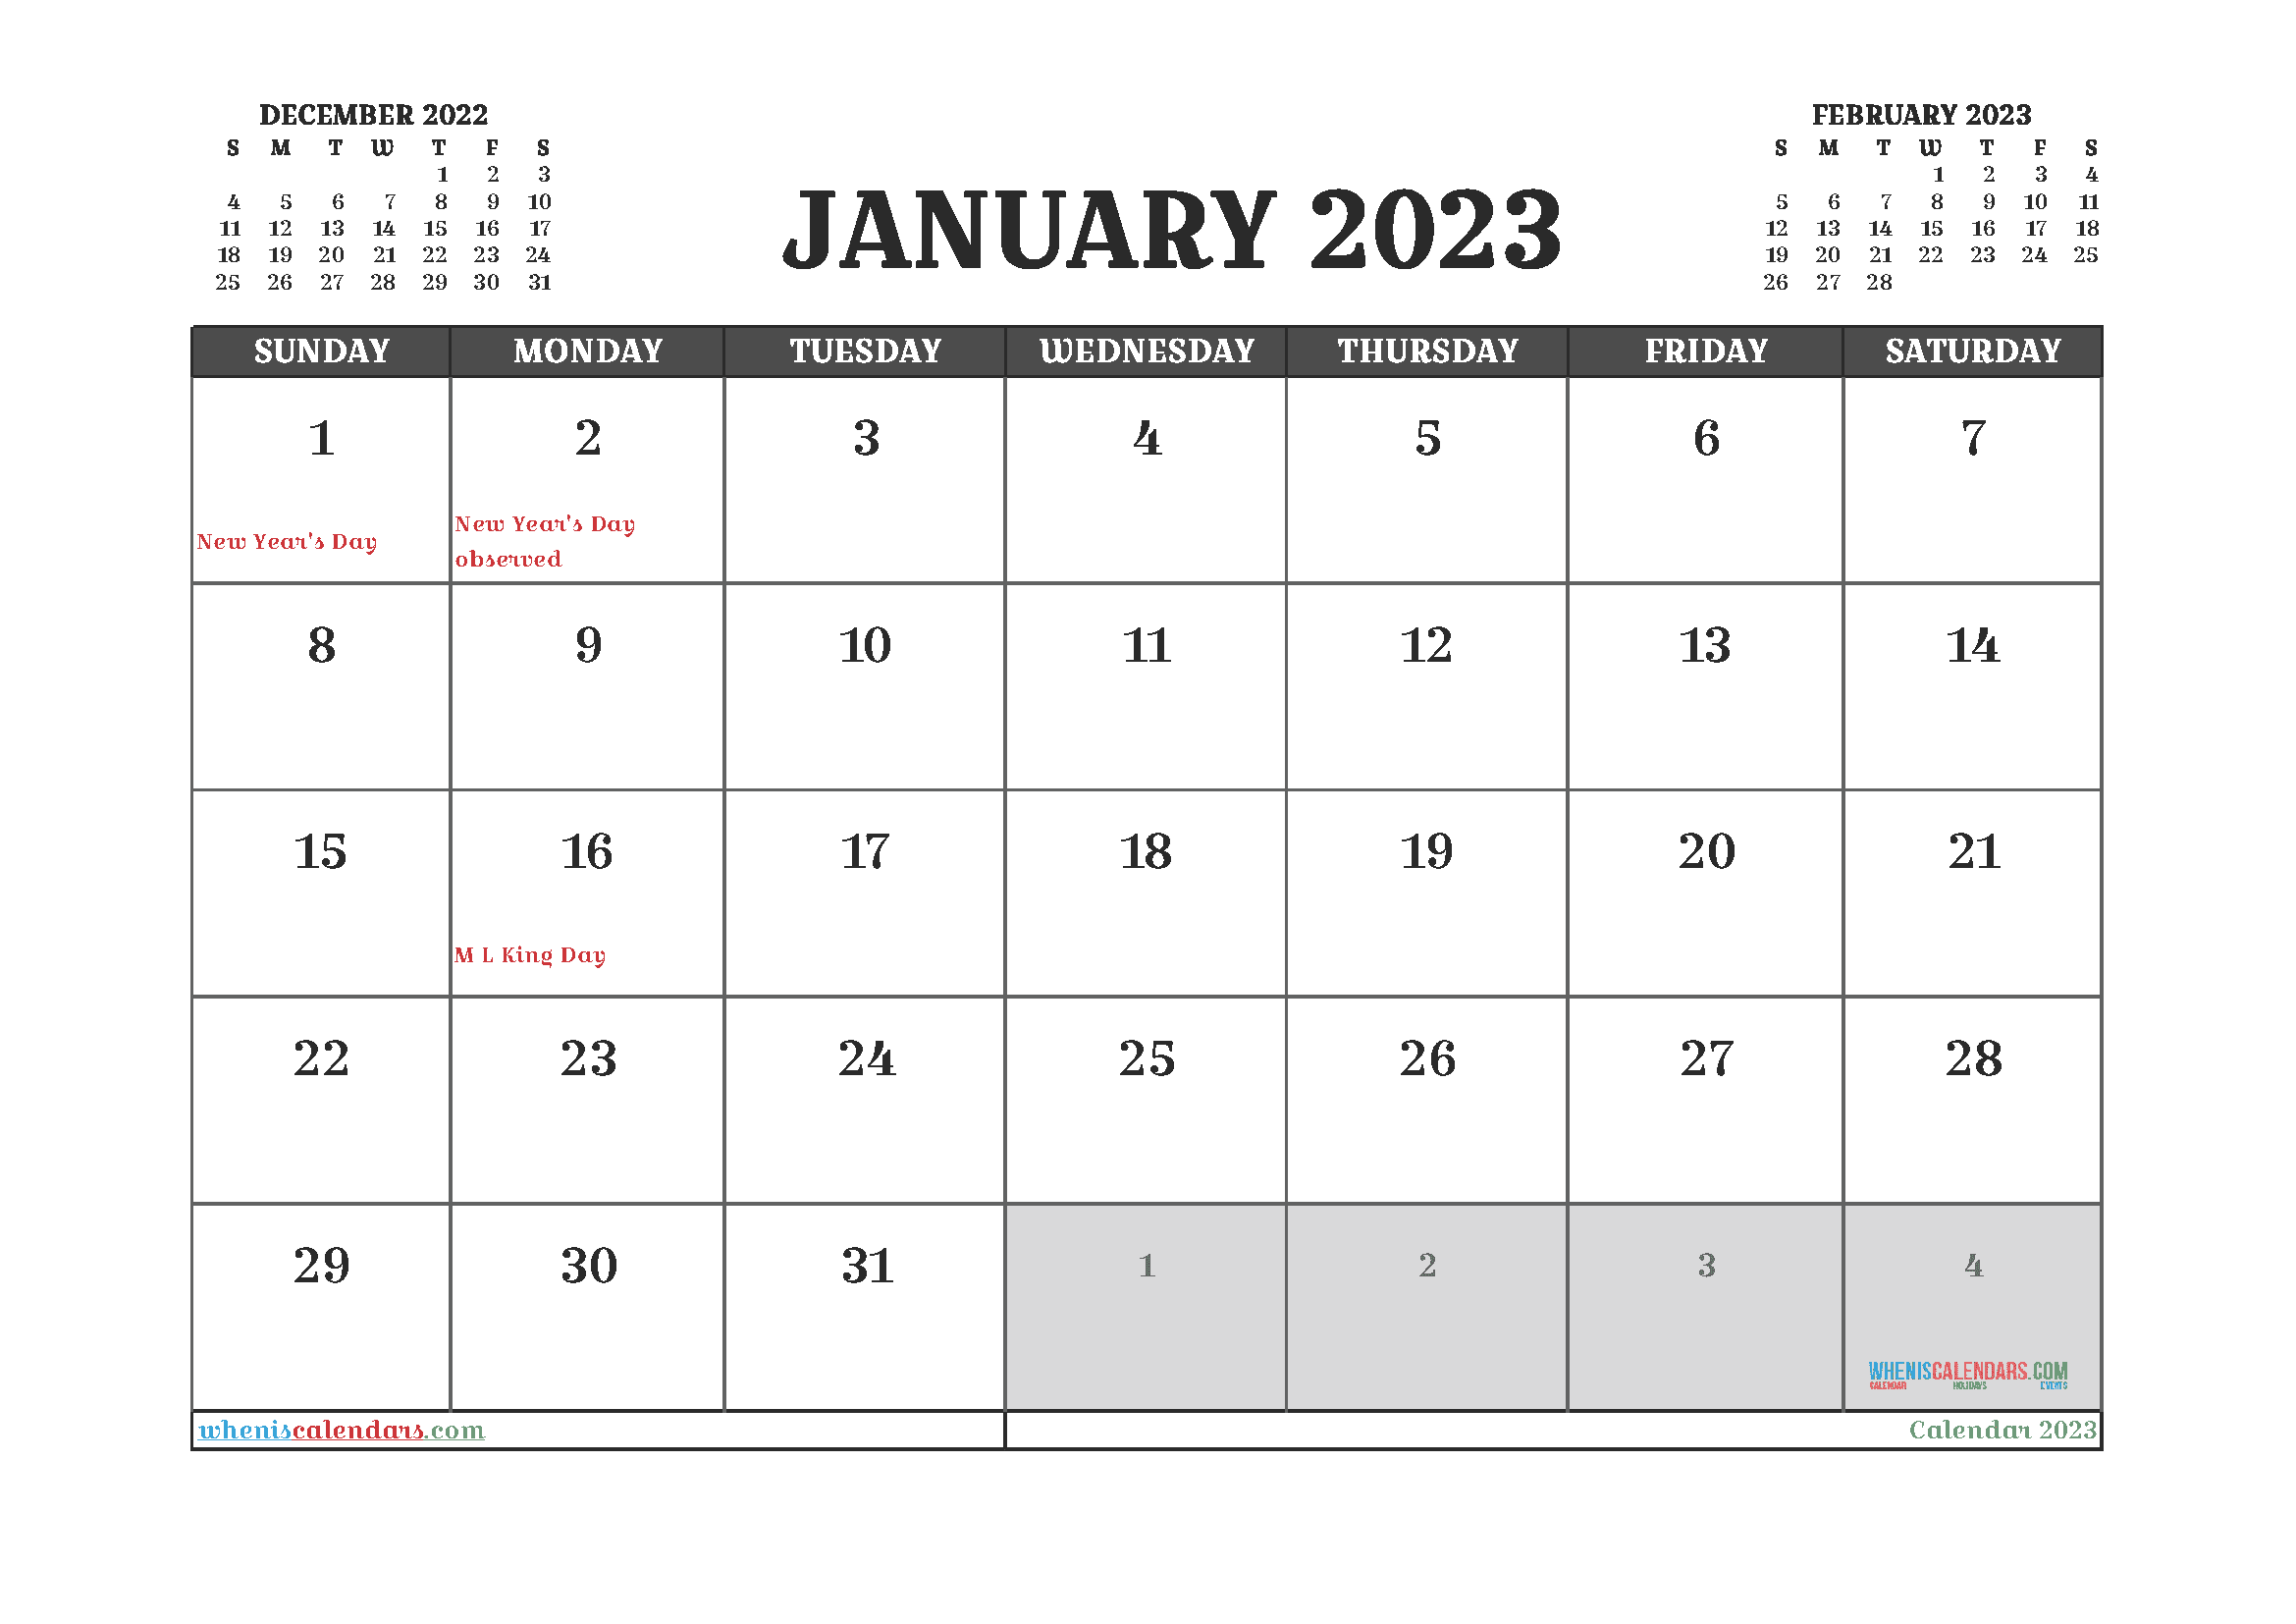 Free Printable Calendar January 2023 with Holidays PDF in Landscape